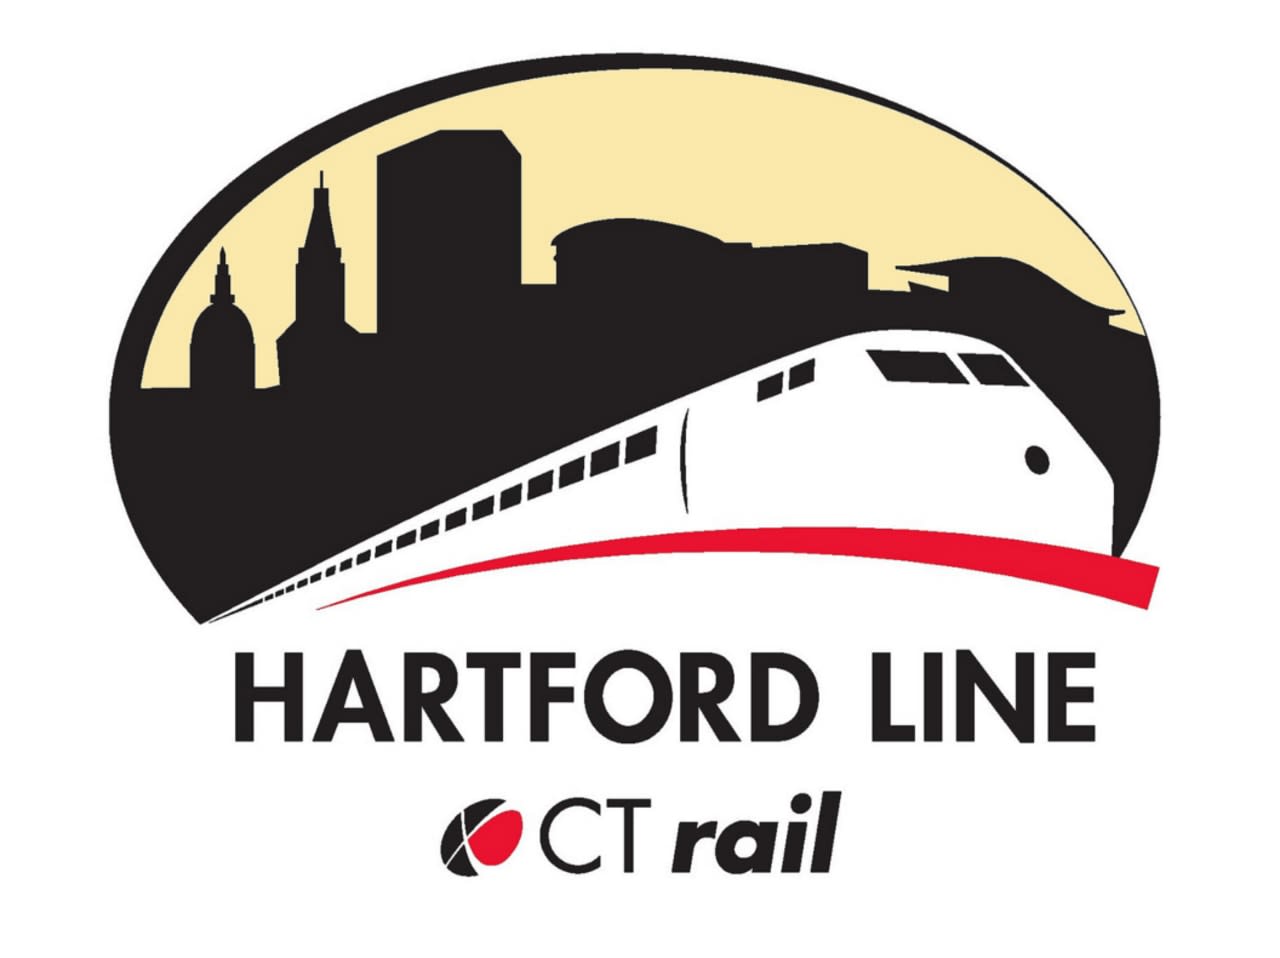 The new logo for the Hartford Line, which will expand rail service from New Haven to Hartford to Springfield, Mass.